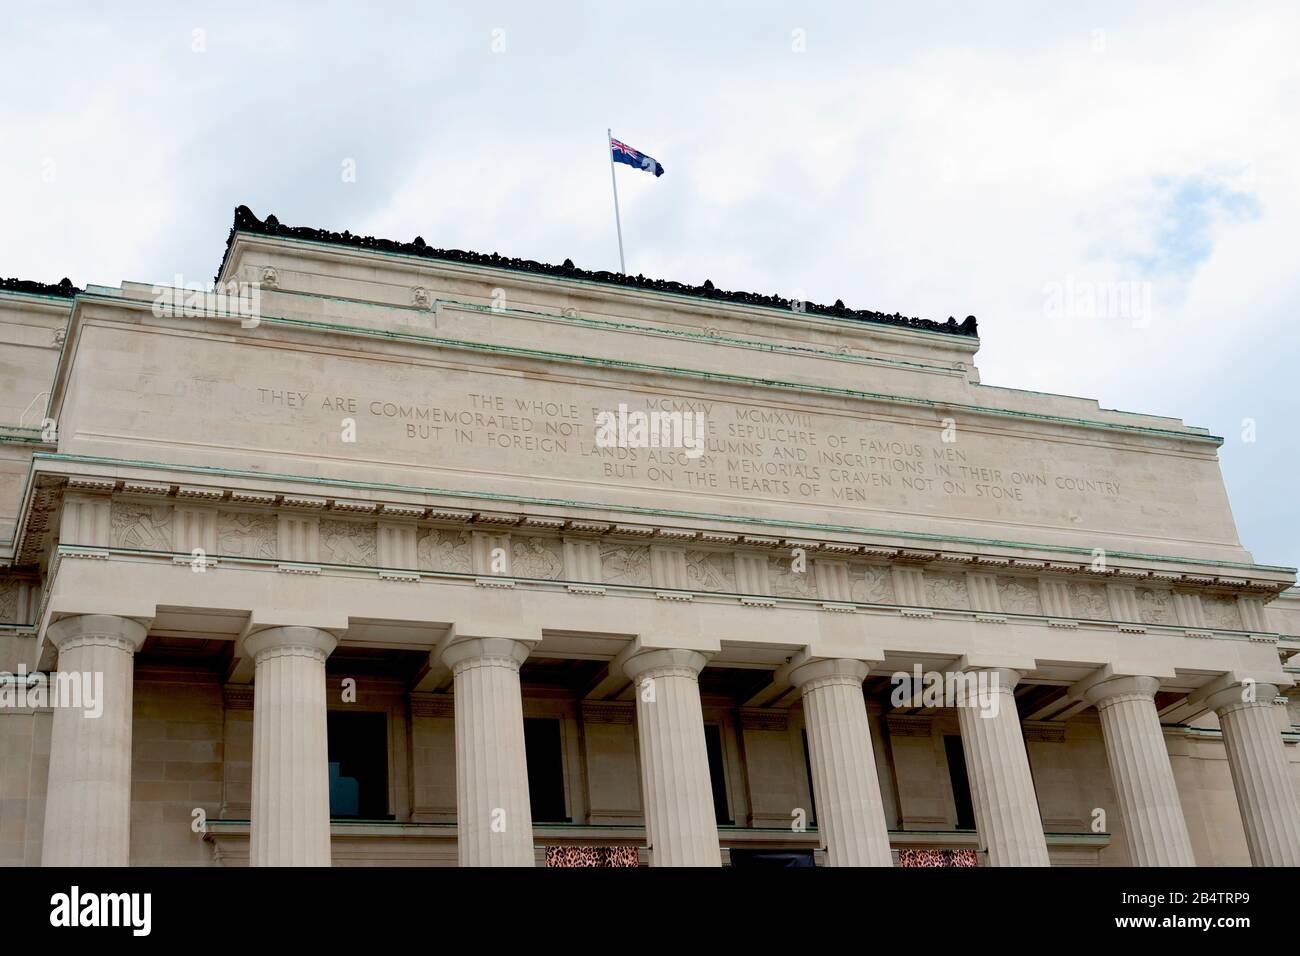 The Auckland Museum and War Memorial, Parnell, Auckland, New Zealand Stock Photo